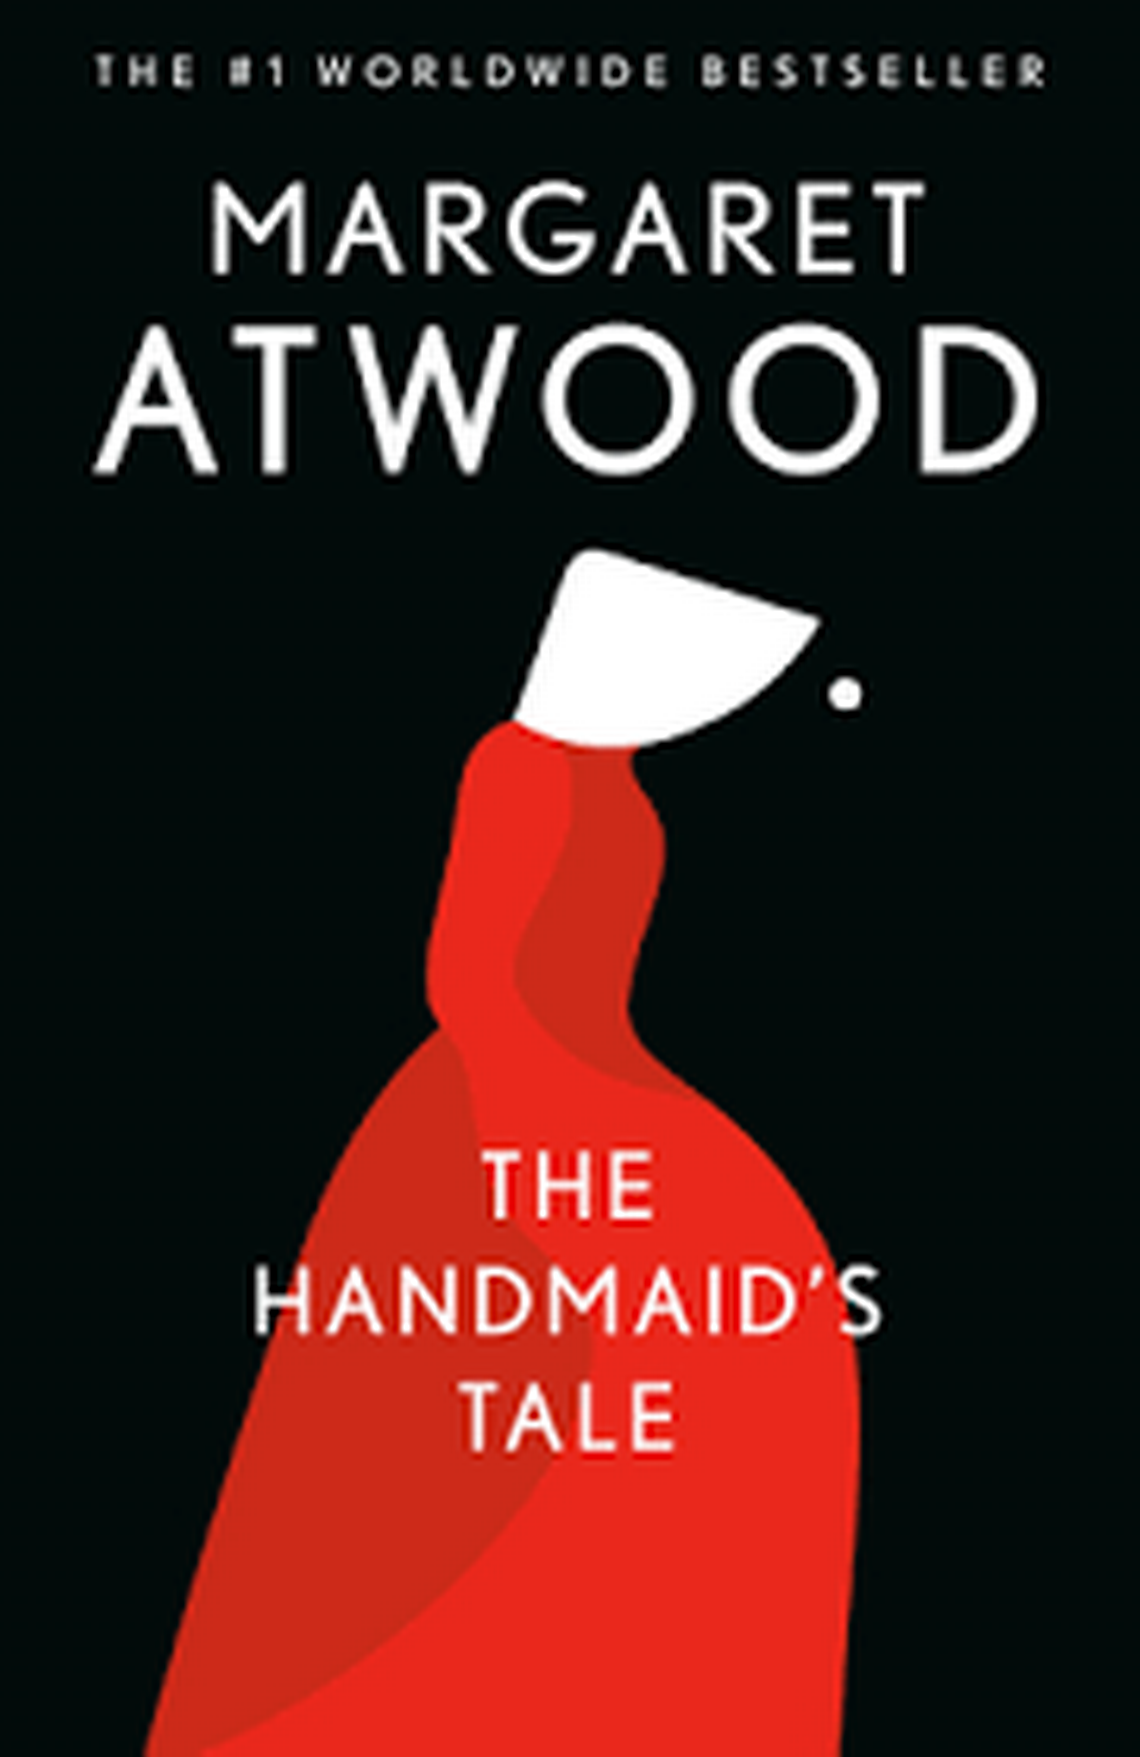 The Handmaid’s Tale by Margaret Atwood.